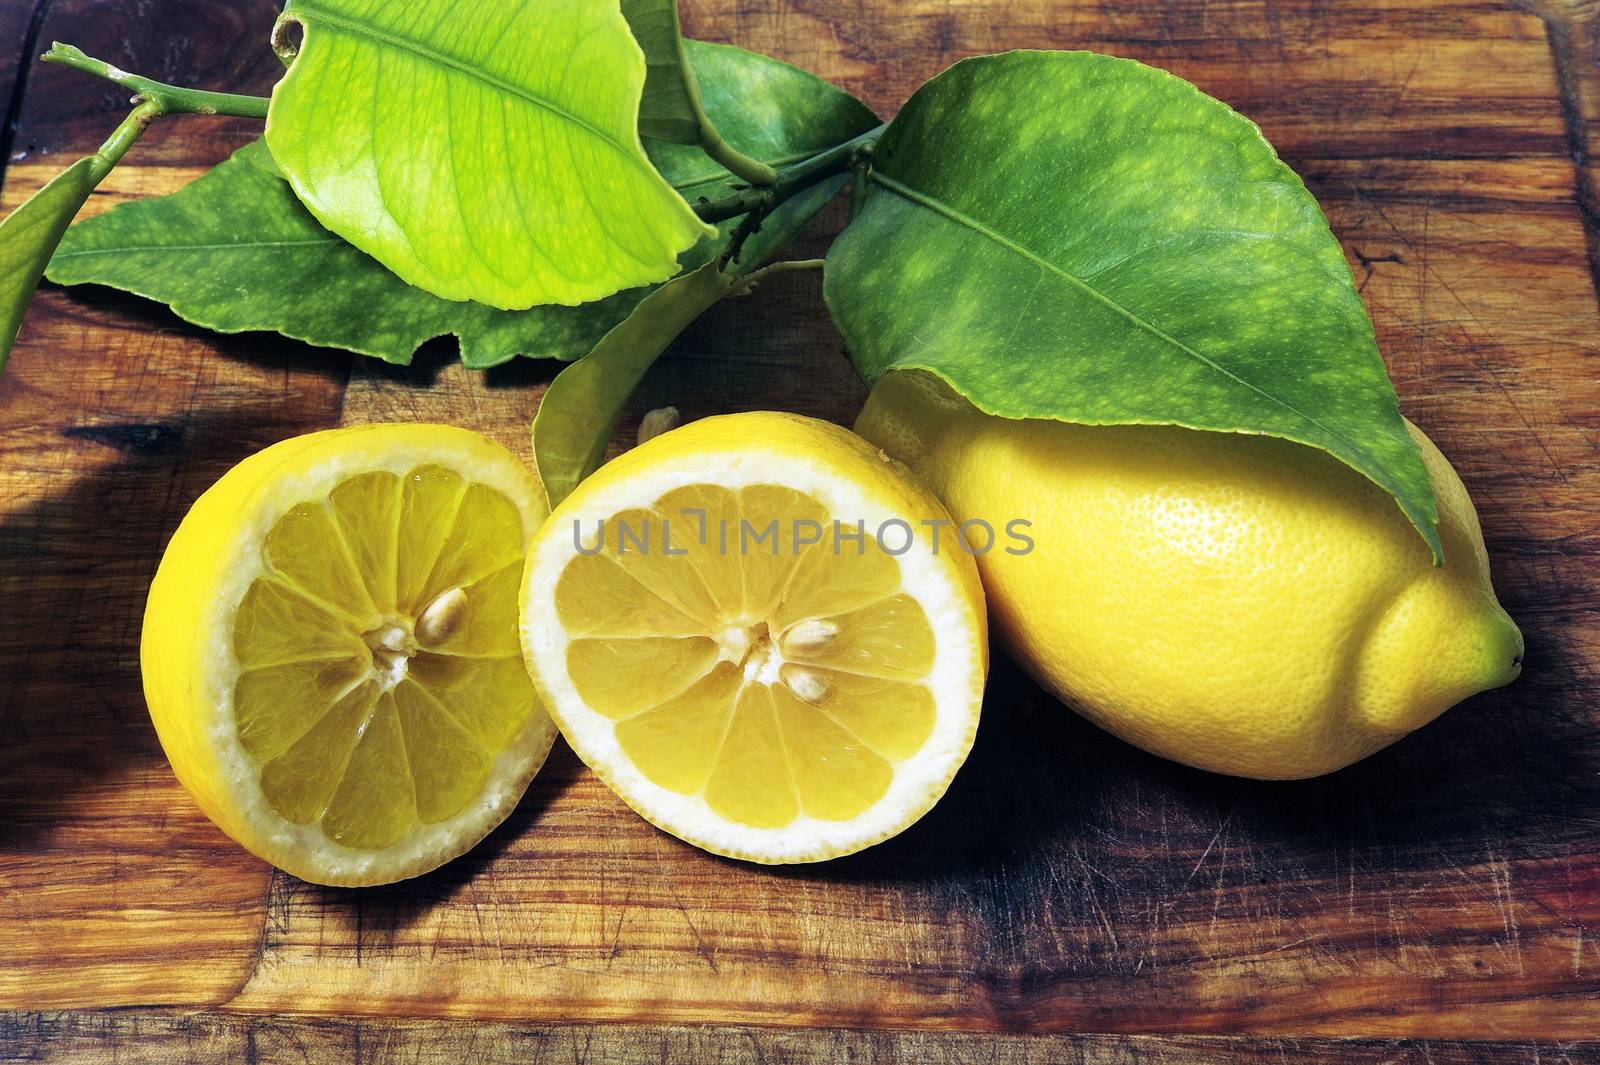 lemons with leaves on a cutting board ready to be cooked